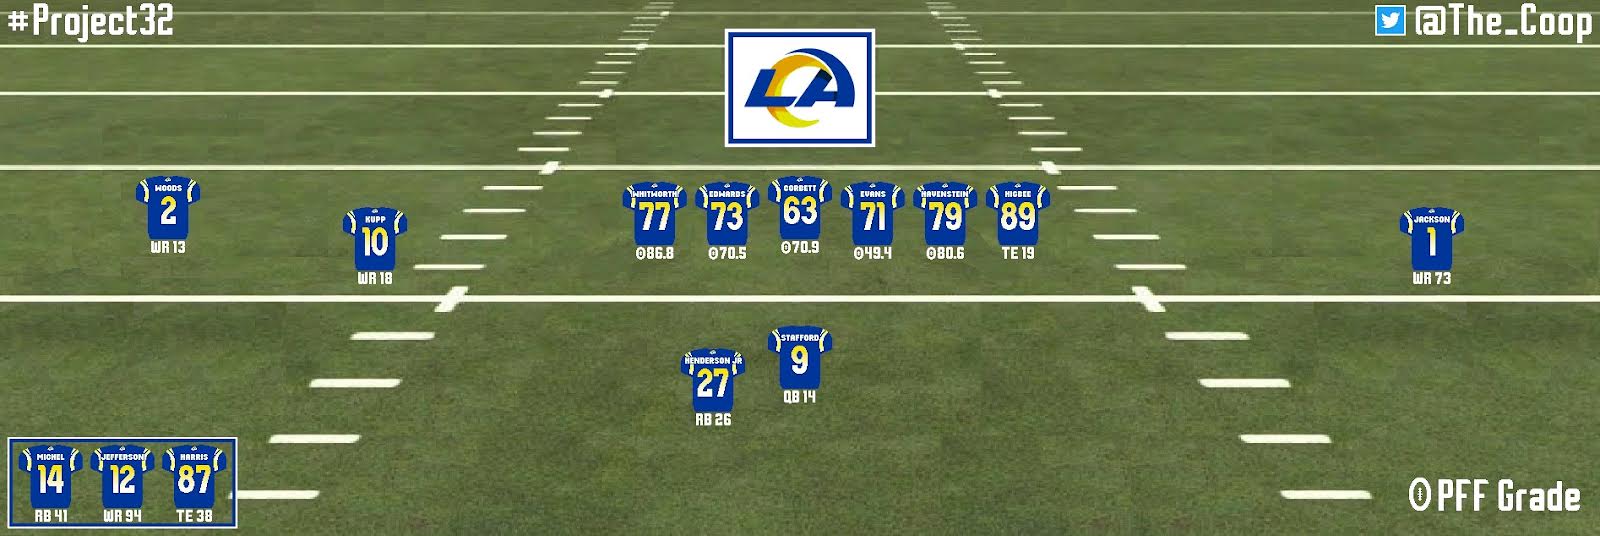 Los Angeles Rams 2021 projections